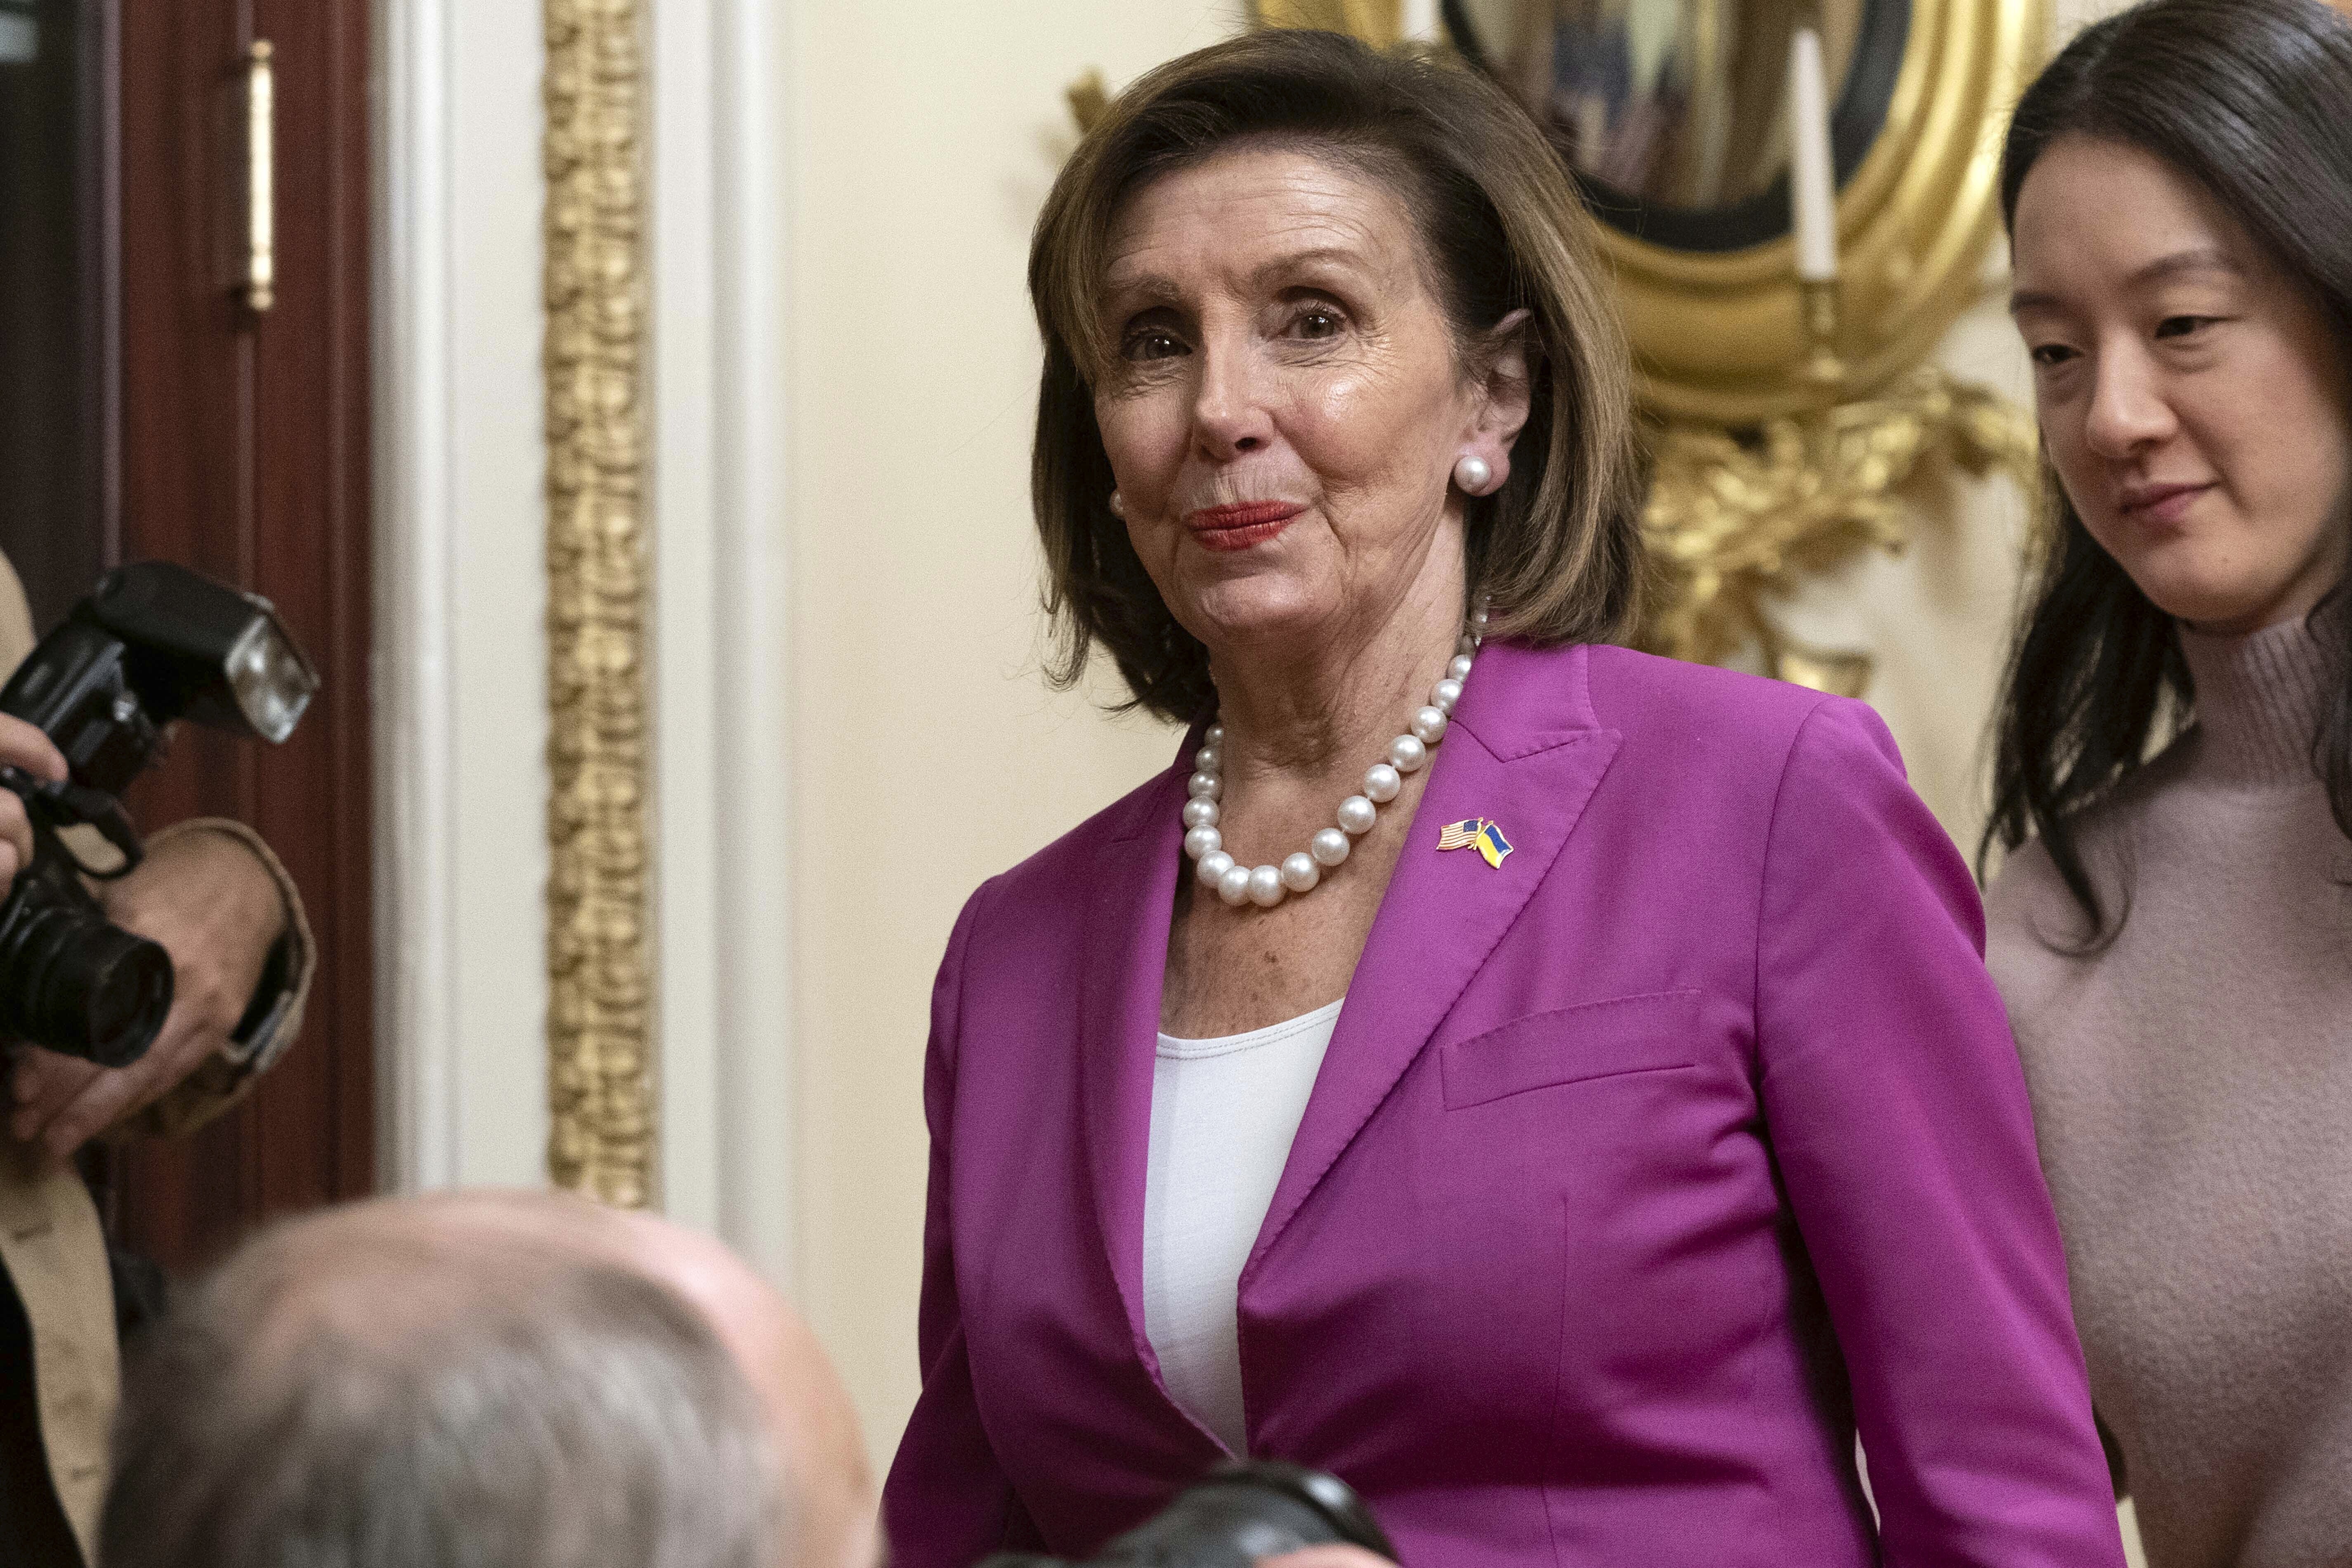 Nancy Pelosi continues spending lavishly on private air travel despite her hypocritical stance on climate